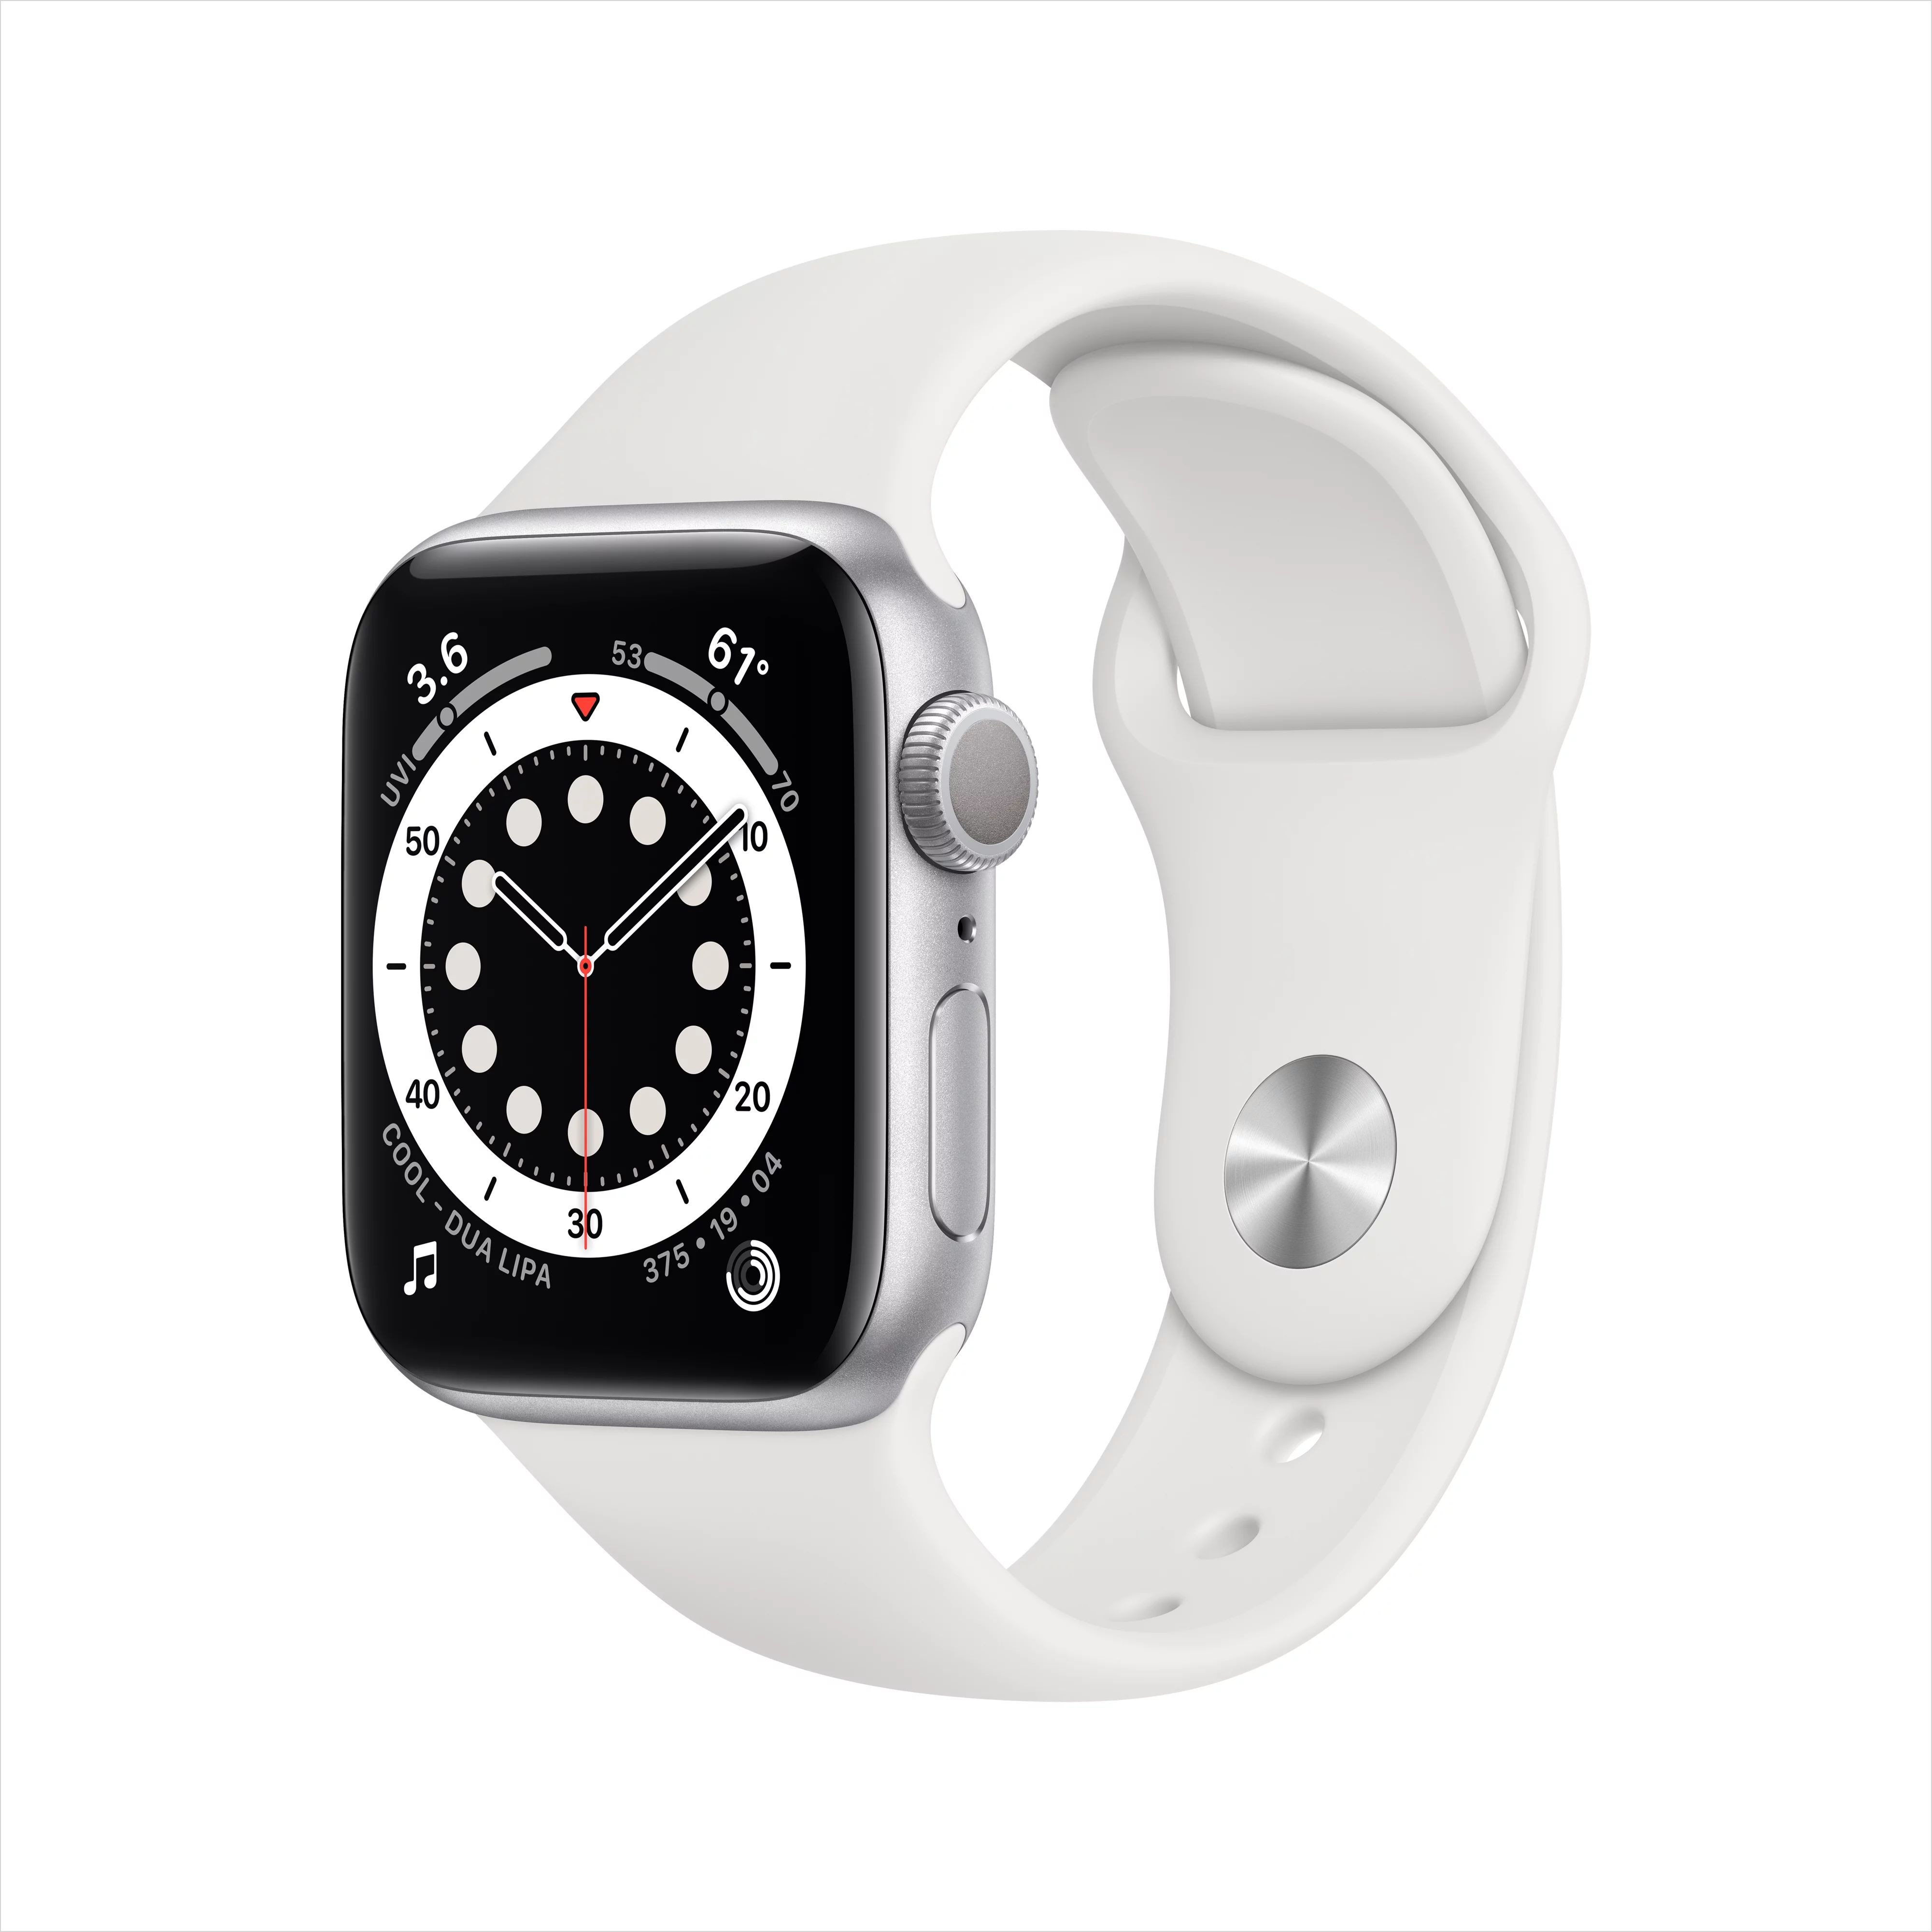 Apple Watch Series 6 GPS, 40mm Silver Aluminum Case with White Sport Band - Regular | Walmart (US)